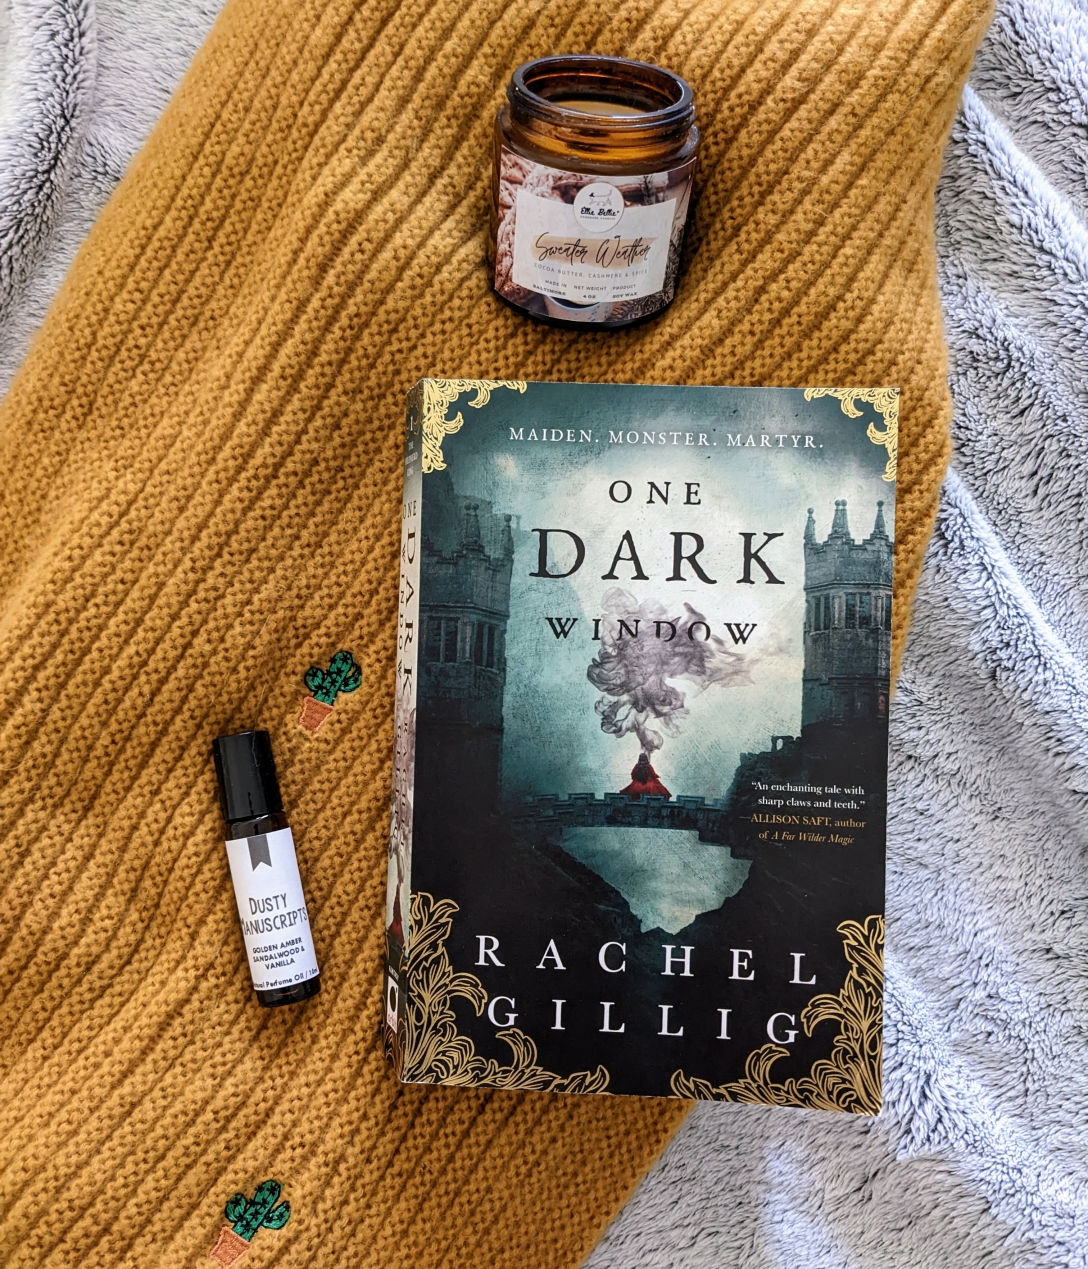 One Dark Window rests on a yellow scarf next to a cashmere candle and an oil perfume rollerball called Dusty Manuscripts.